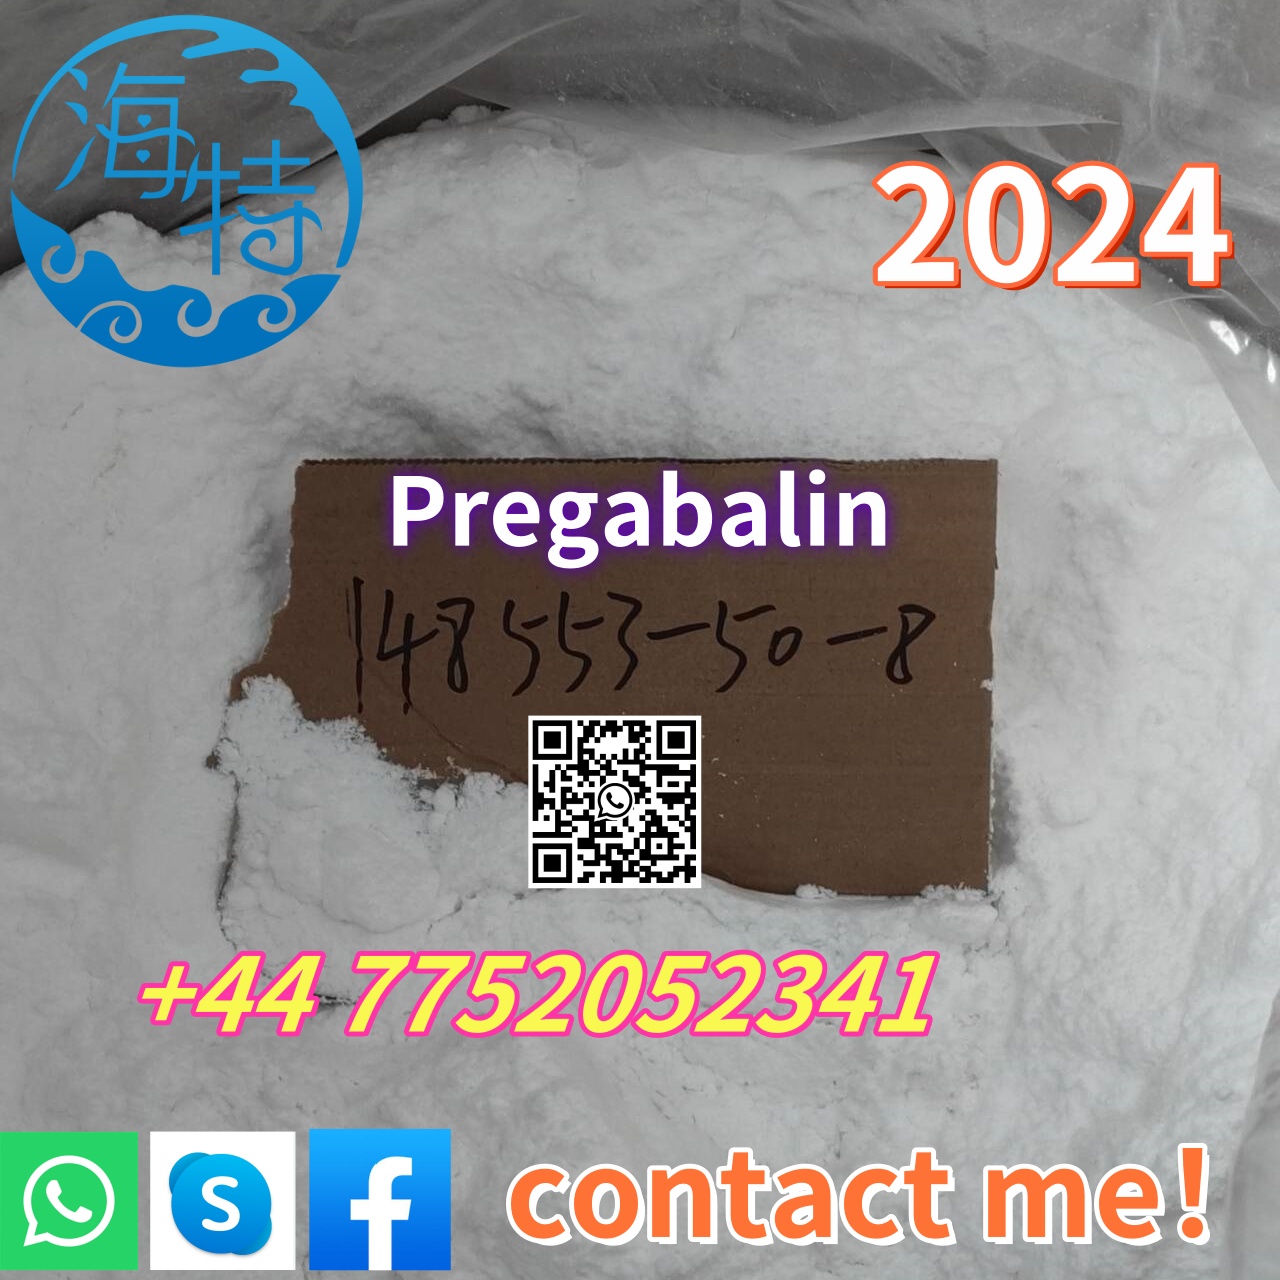   Agent shipping from China to  Malaysia by air and sea door to door a,1/F,NO 32, Xi peng ling Lu, Hebian ,Helong street,Baiyun District, Guangzhou, China,Services,Free Classifieds,Post Free Ads,77traders.com